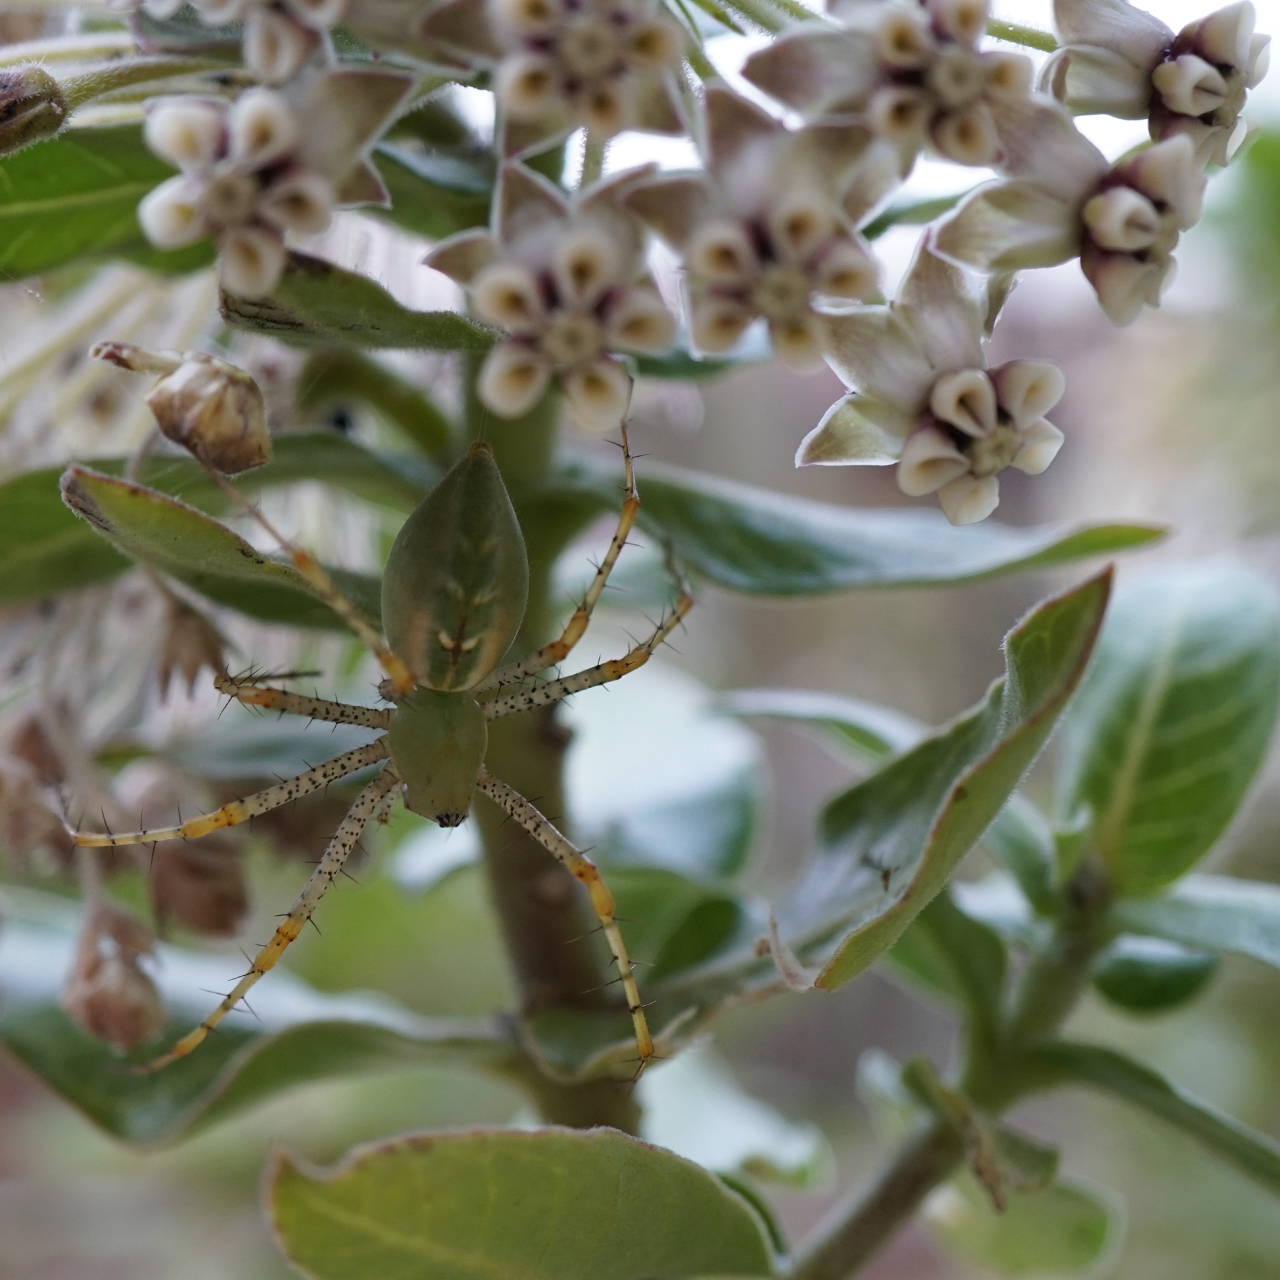 Photo of a Green Lynx Spider on a milkweed plant that shares her coloration